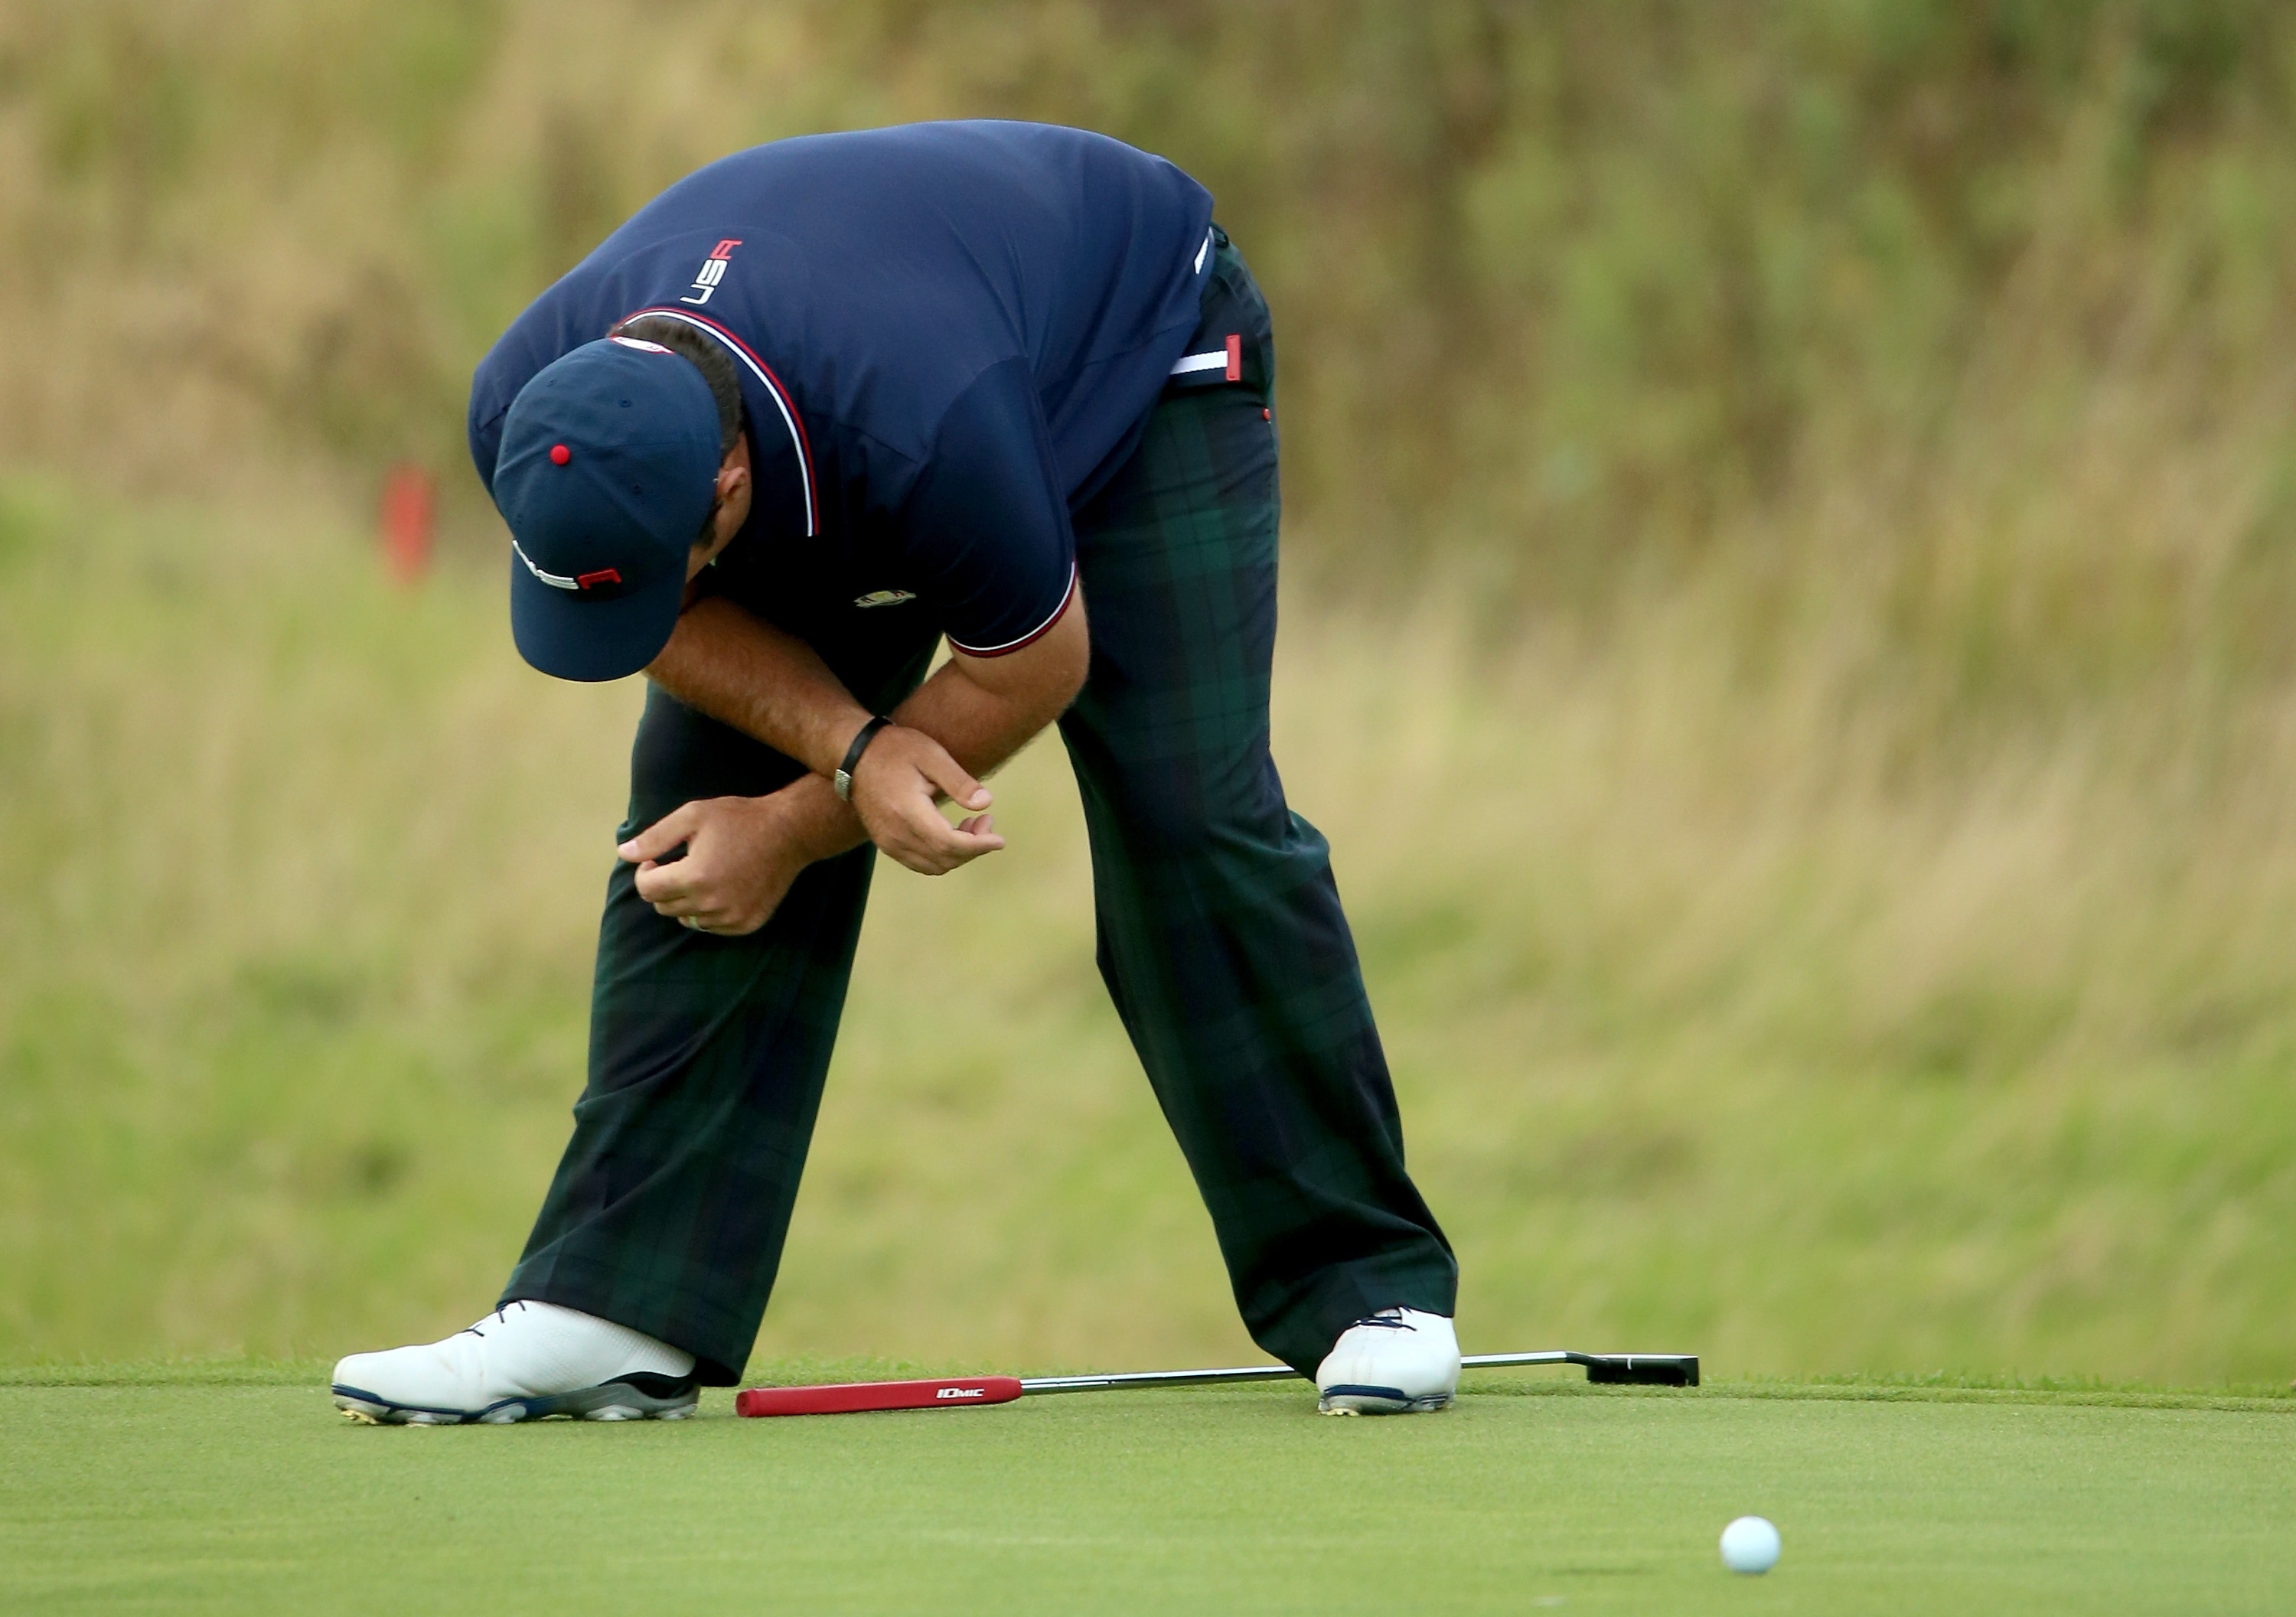 Patrick Reed misses a putt on the 15th green during the Afternoon Foursomes (Getty Images)